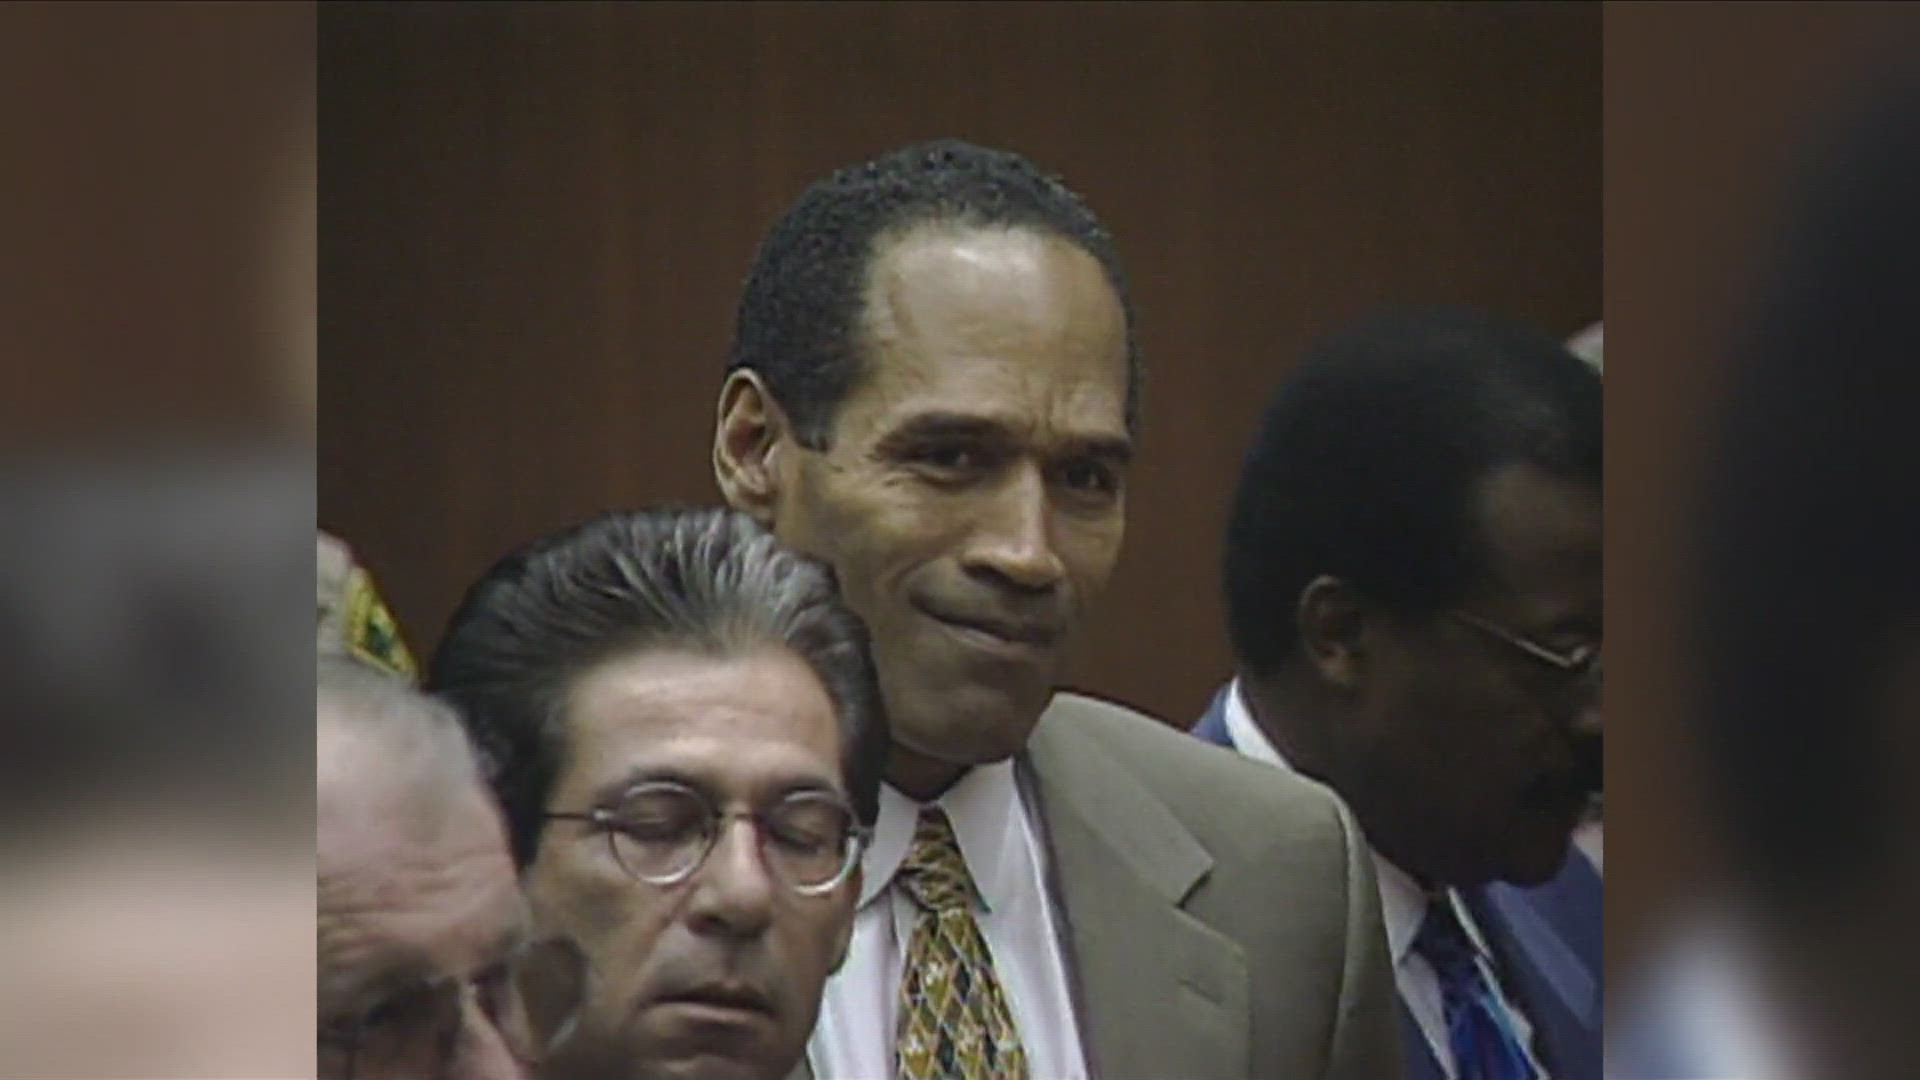 Former football superstar and Hollywood actor OJ Simpson, who was acquitted of the killings of his former wife and her friend died on Thursday.